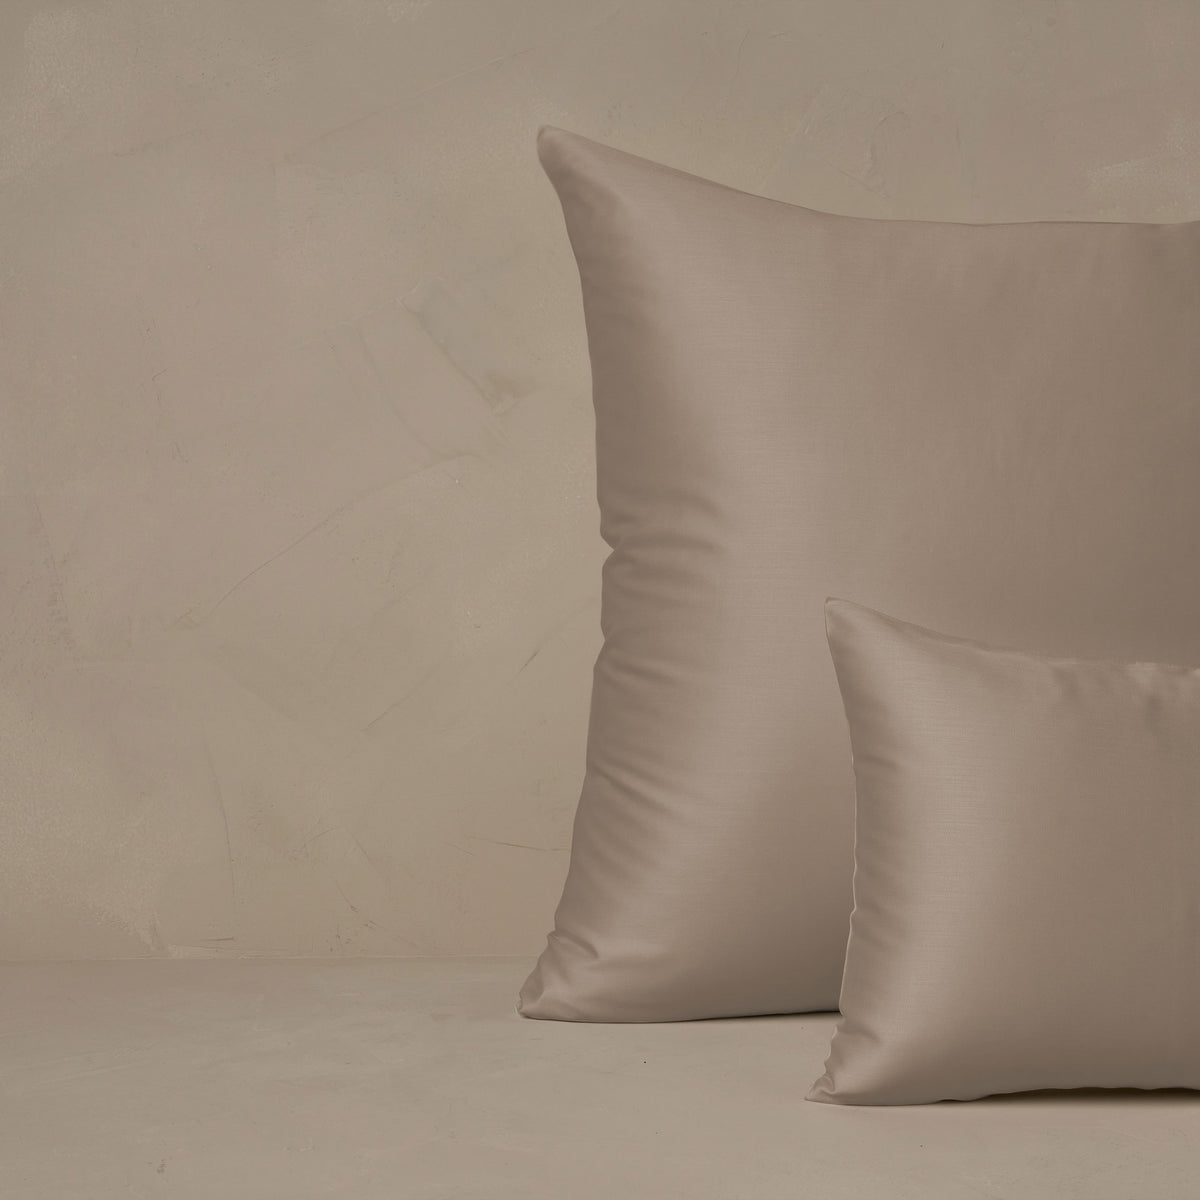 An image of a small boudoir or travel size pillow stacked in front of a large euro size pillow. The pillow cases are made in Italy of LETTO Woodland Silk fabric in color Candlelight, a smooth and silky beechwood modal. data-image-id=